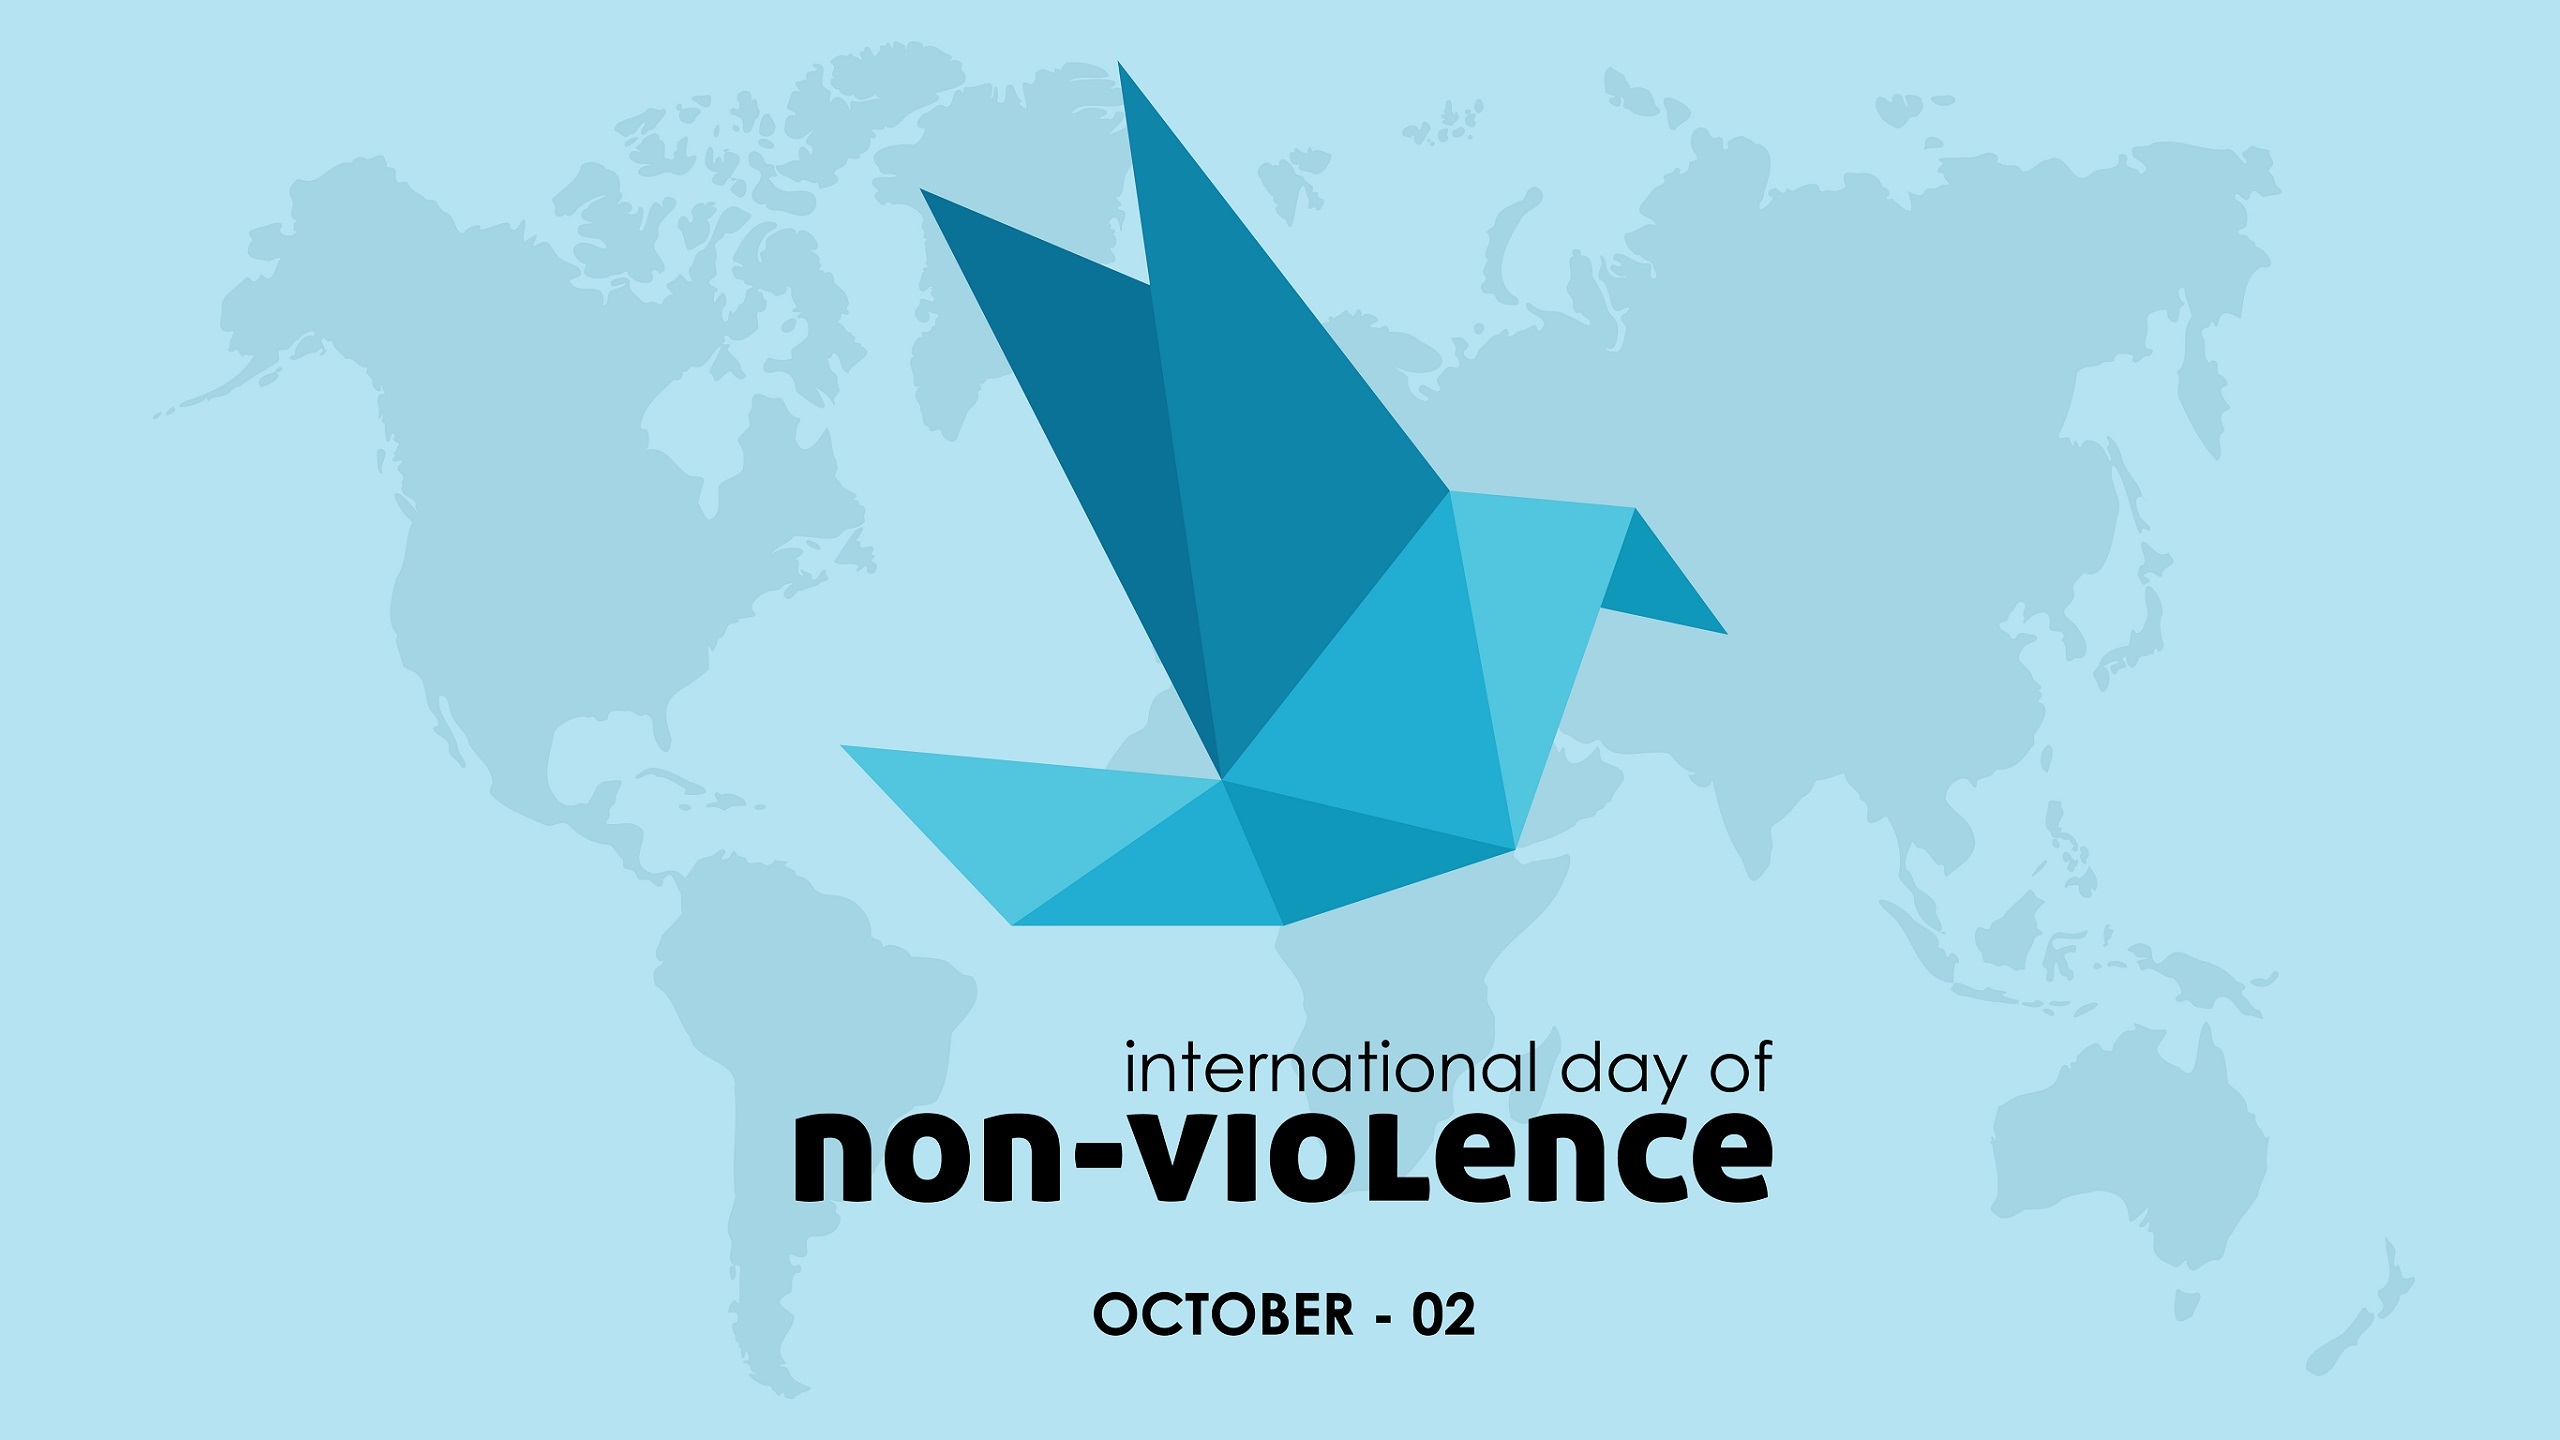 World Honors Mahatma Gandhi With International Day of Non-Violence